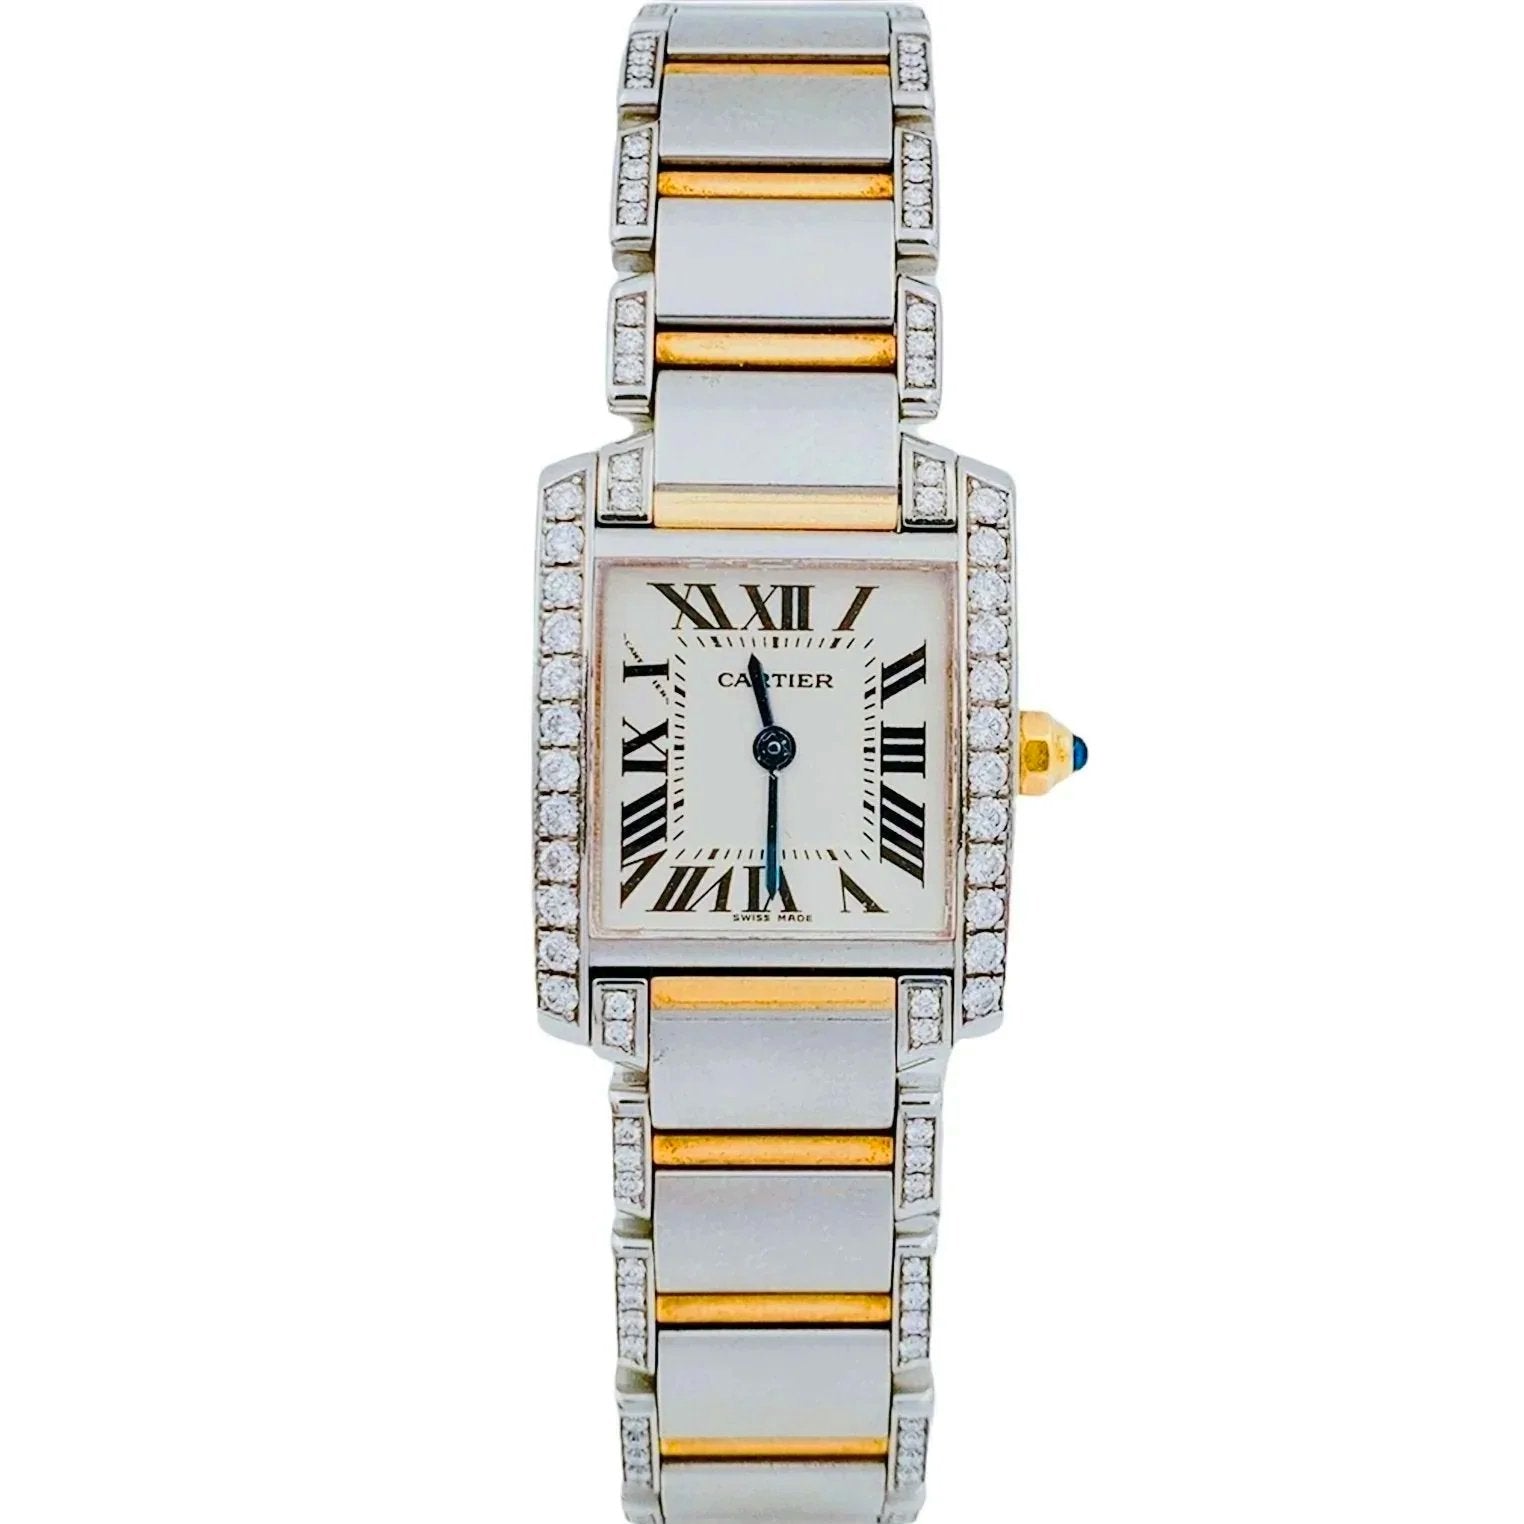 Ladies Small Cartier Tank Francaise Two-Tone Watch with Diamonds In Polished Finish. (Pre-Owned WE1002SF)